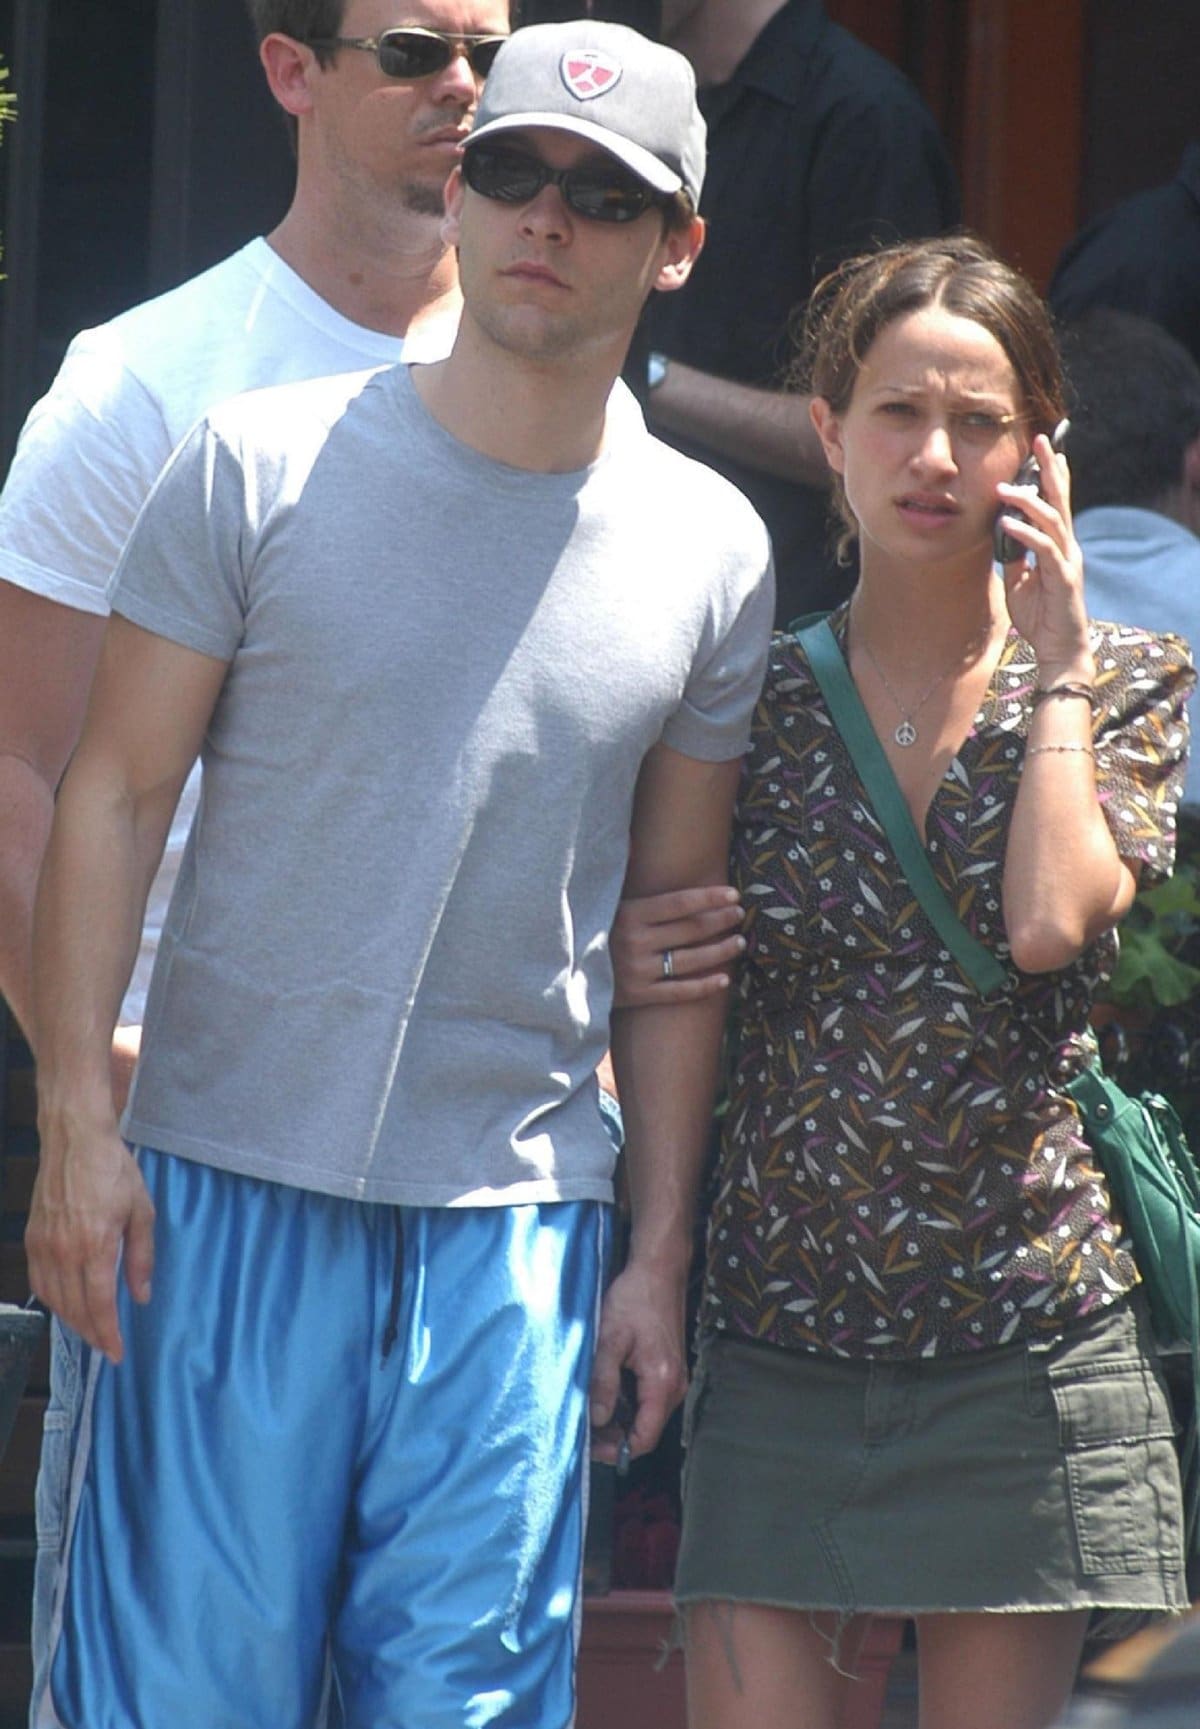 Tobey Maguire and Jennifer Meyer met in early 2003 and married in 2007 in an intimate wedding ceremony in Hawaii